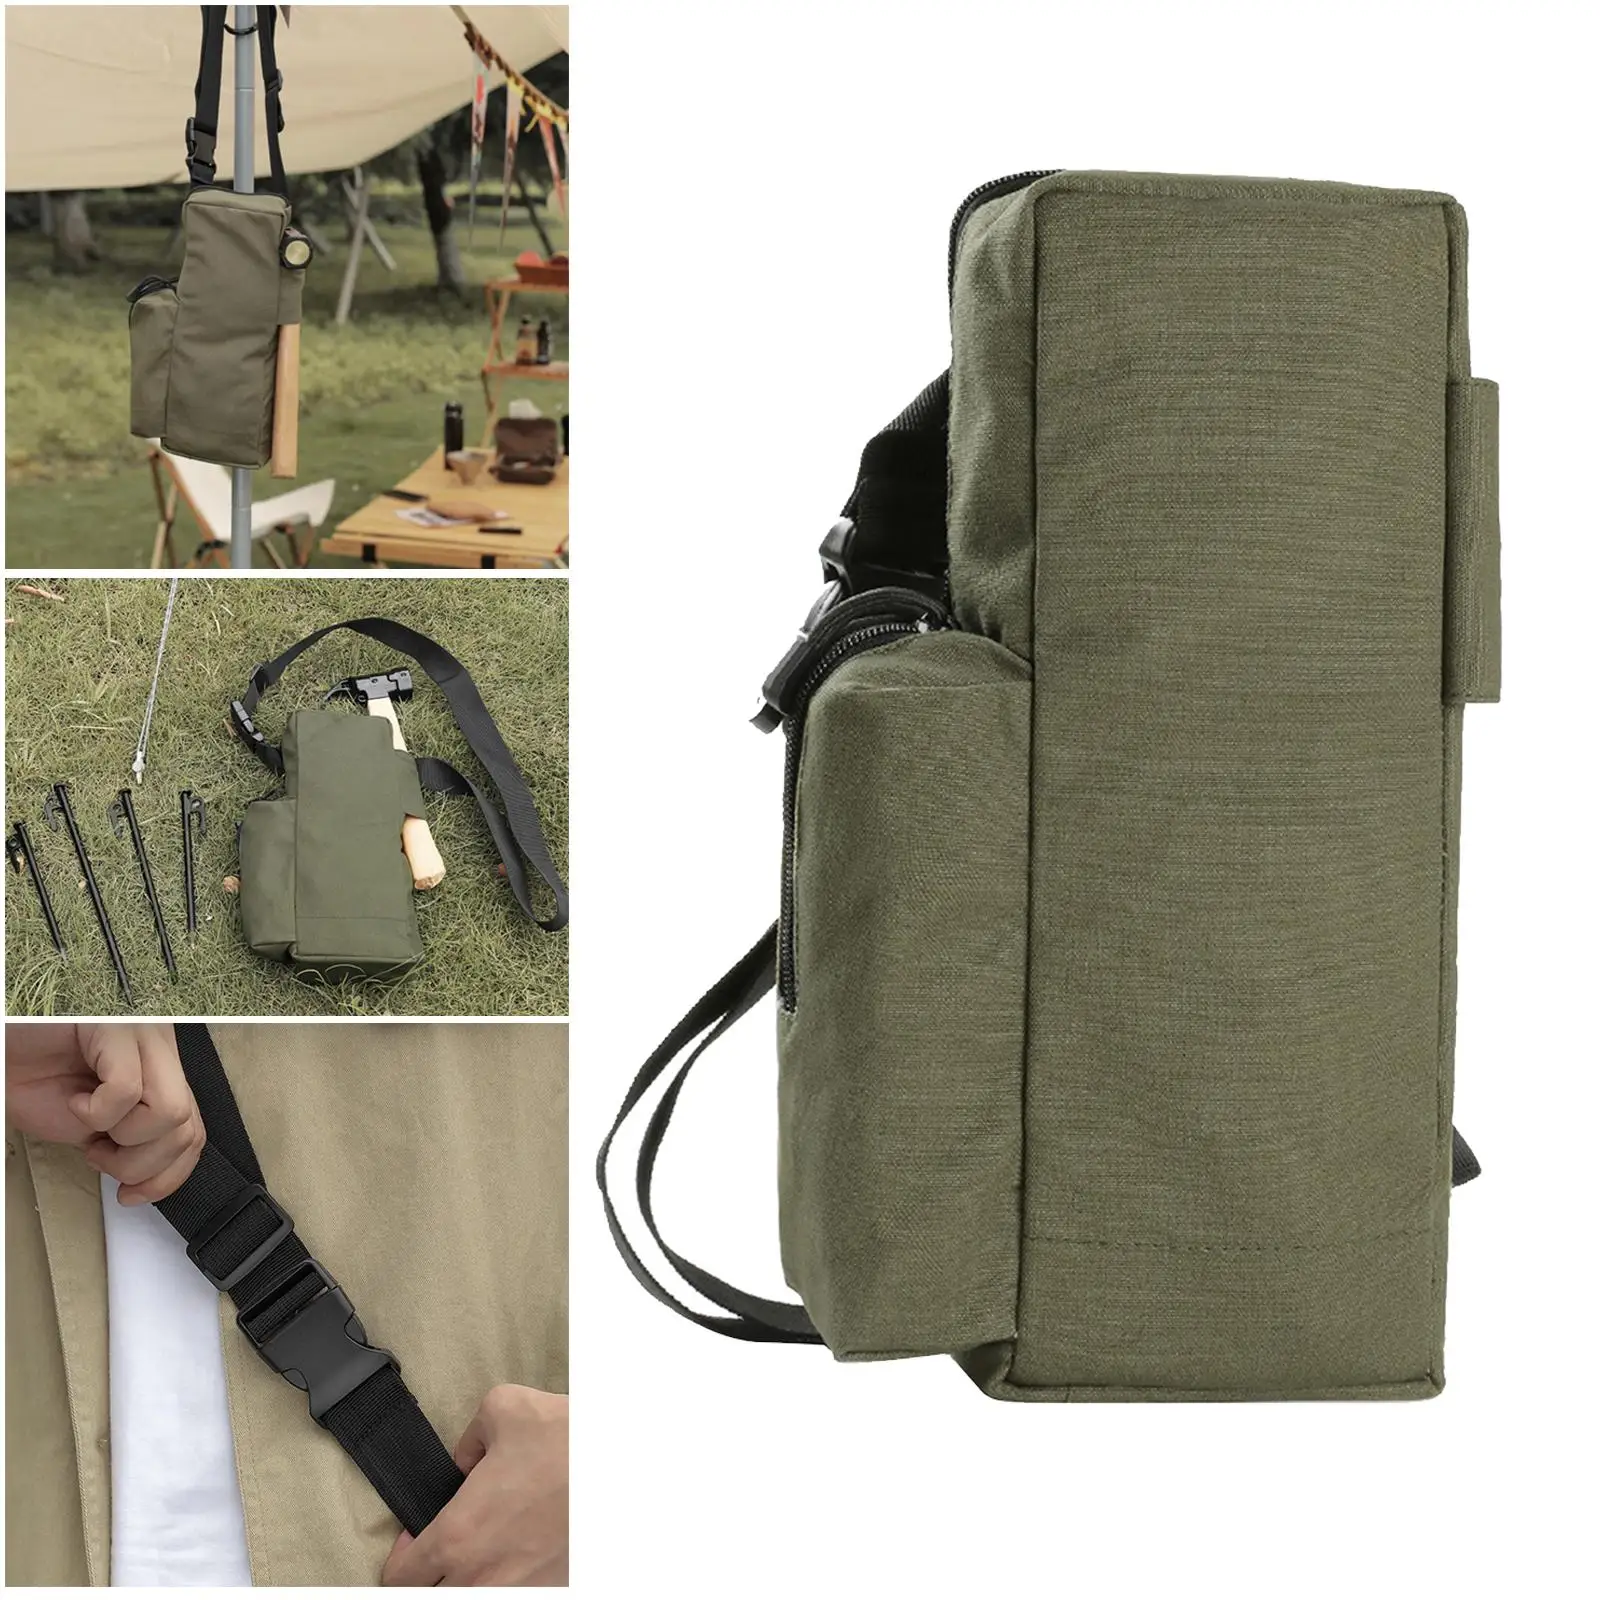 Portable Tent Peg Bag Tent Nails Organizer Case Holder Pouch Outdoor Camping Hiking Accessories